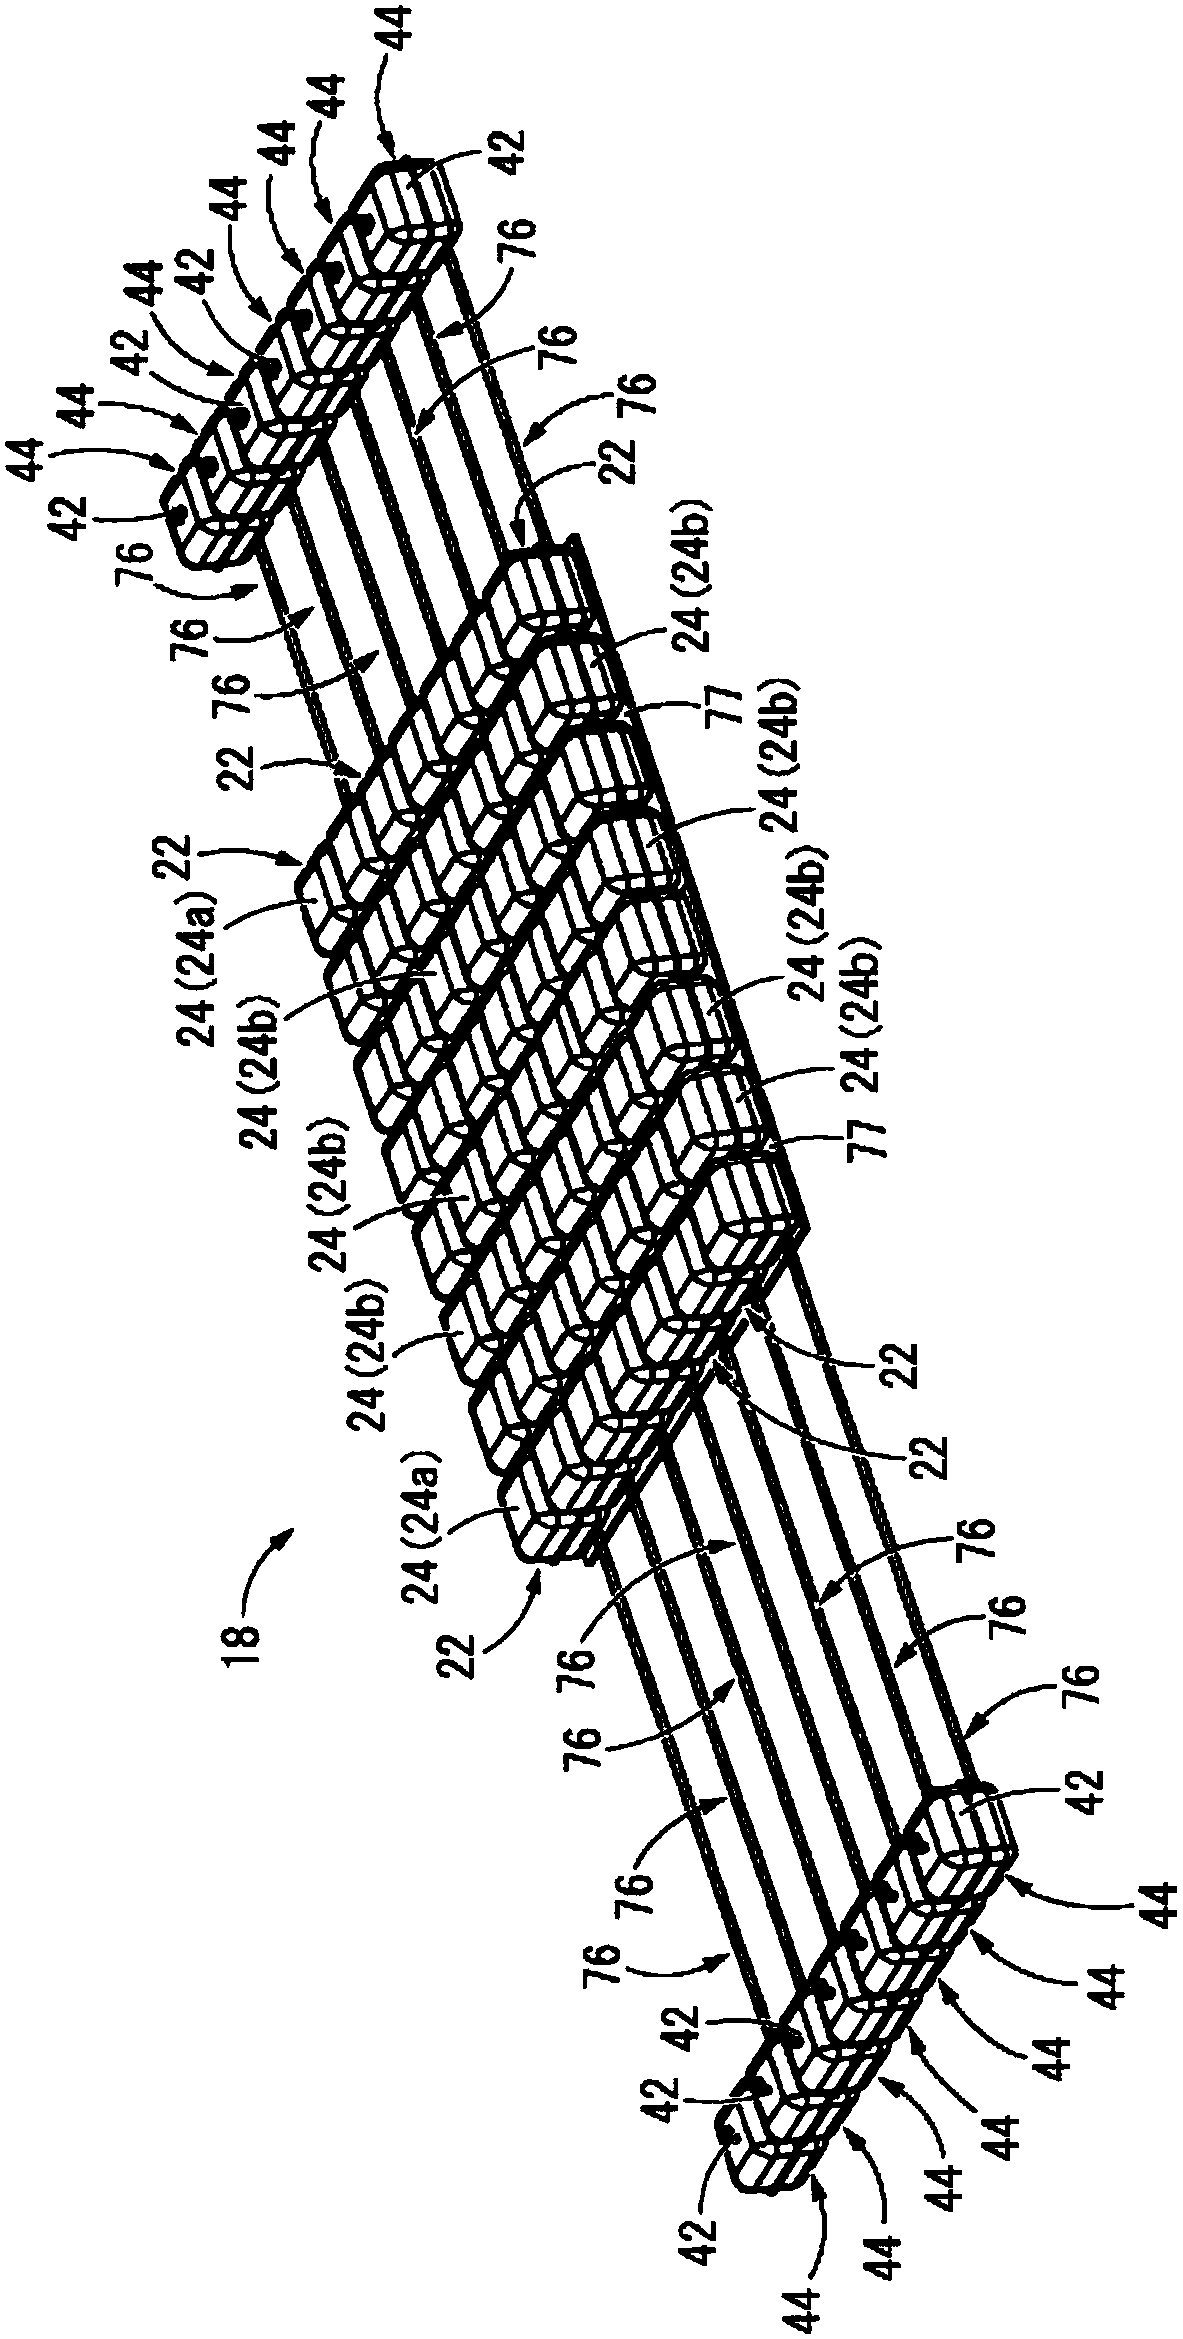 Body pressure support cushion and auxiliary cells constituting same